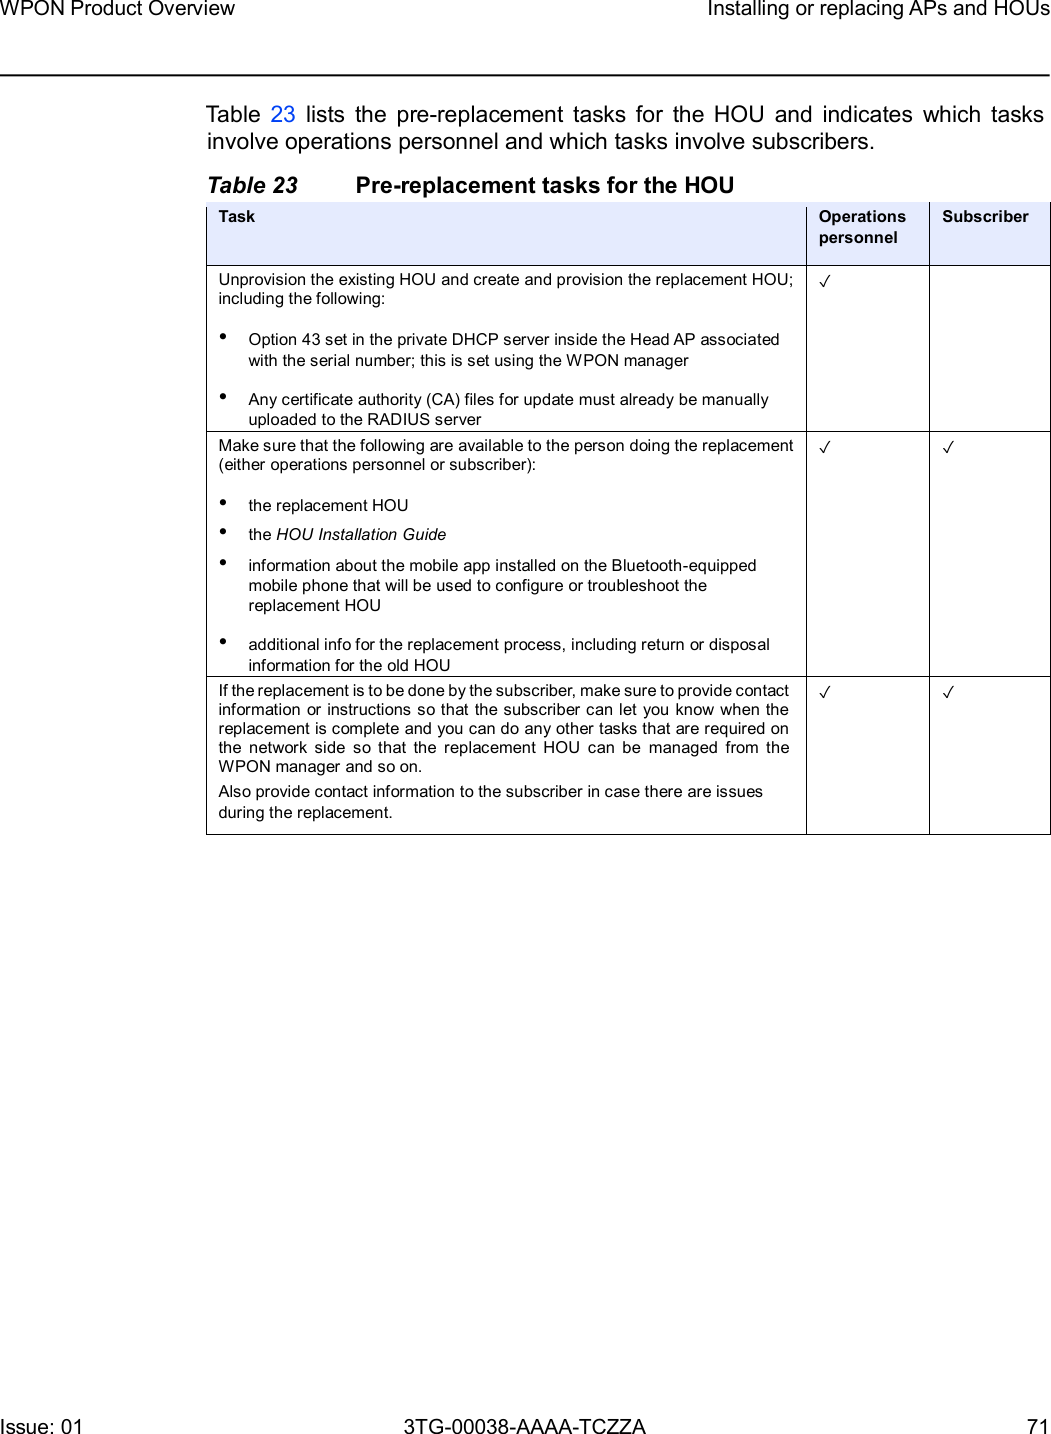 Page 71 of Nokia Bell 7577WPONAPAC WPON User Manual WPON Product Overview